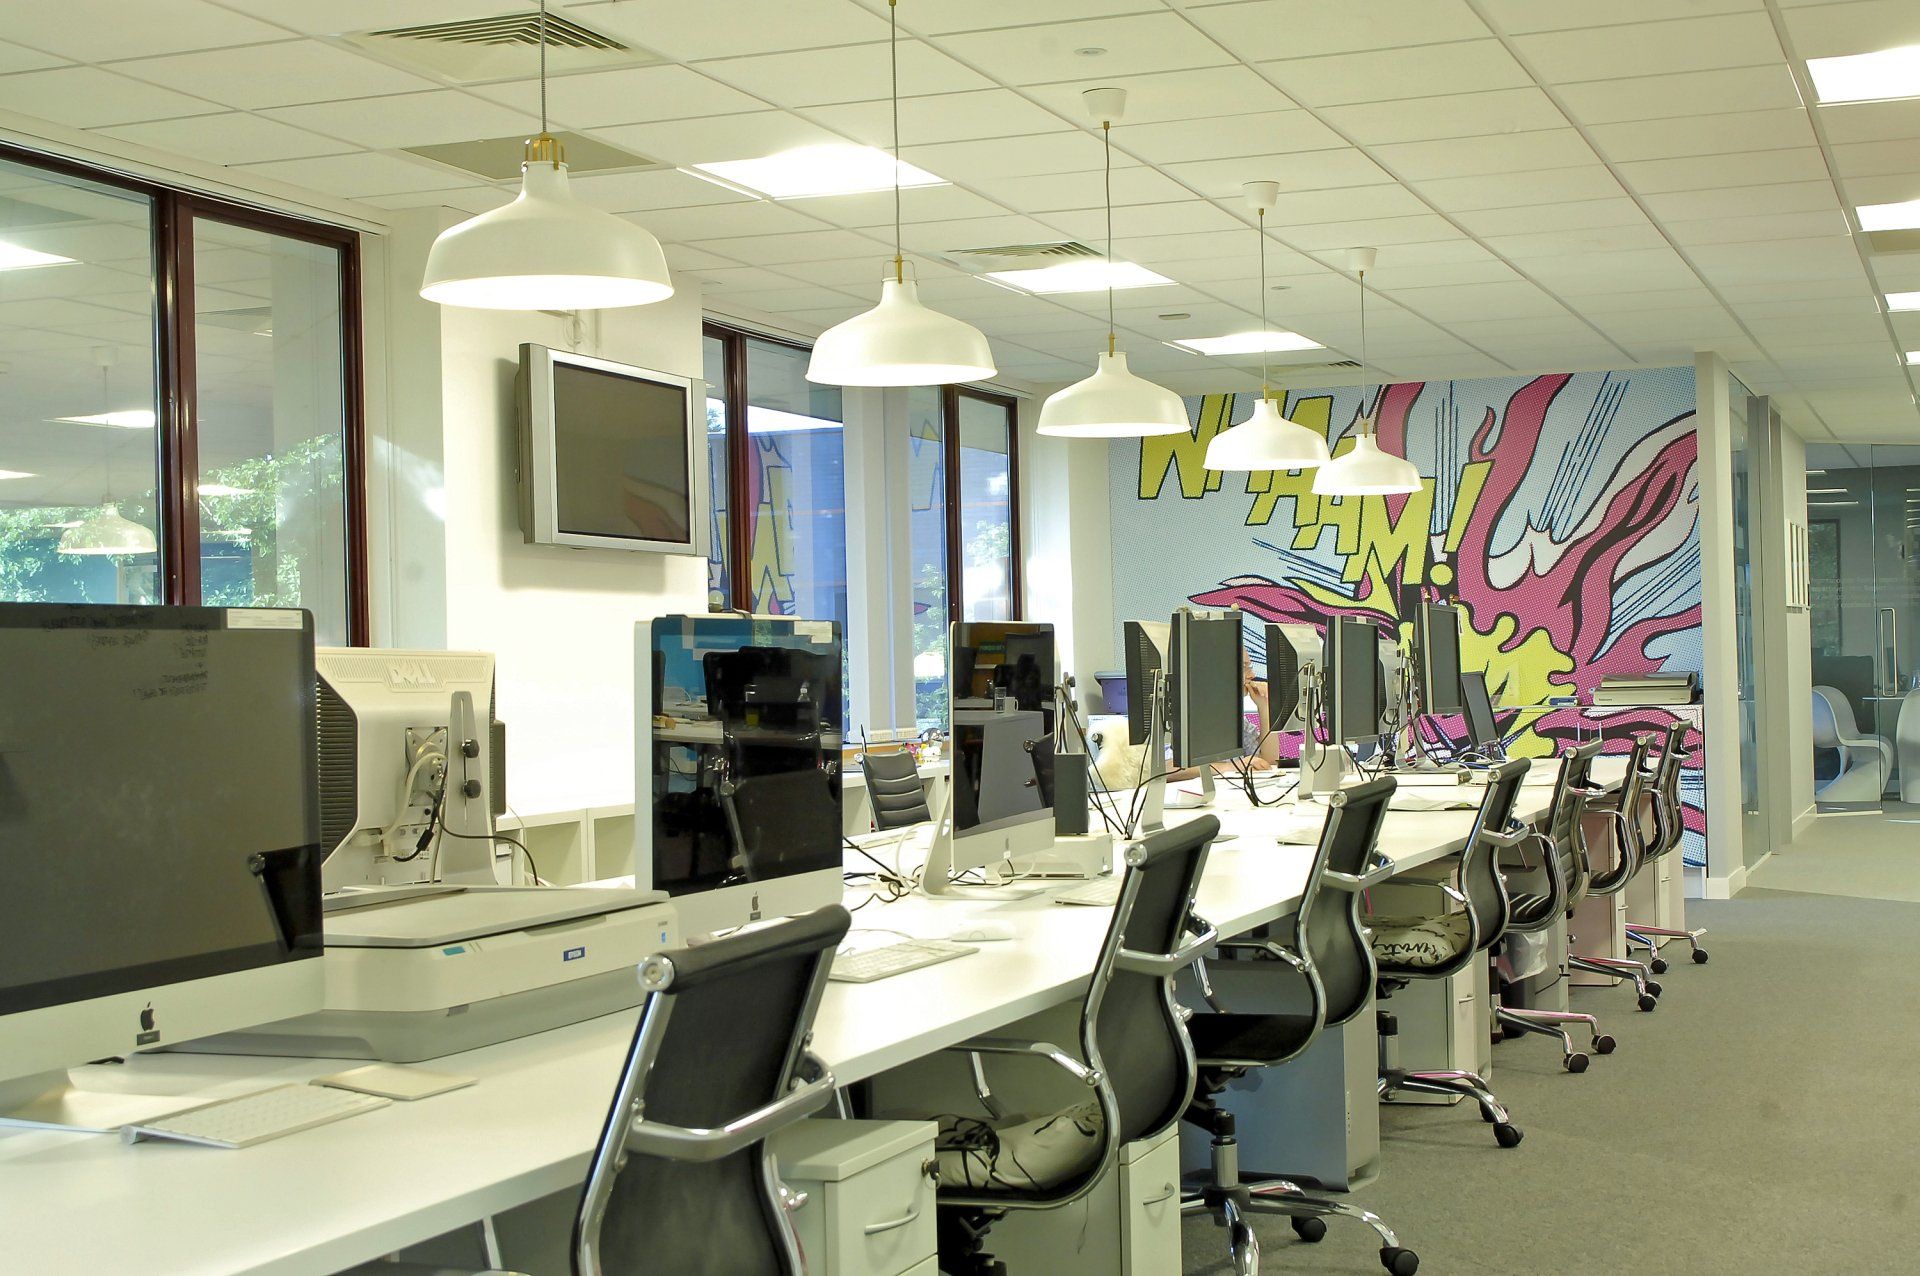 A row of desks and chairs in an office with a mural on the wall